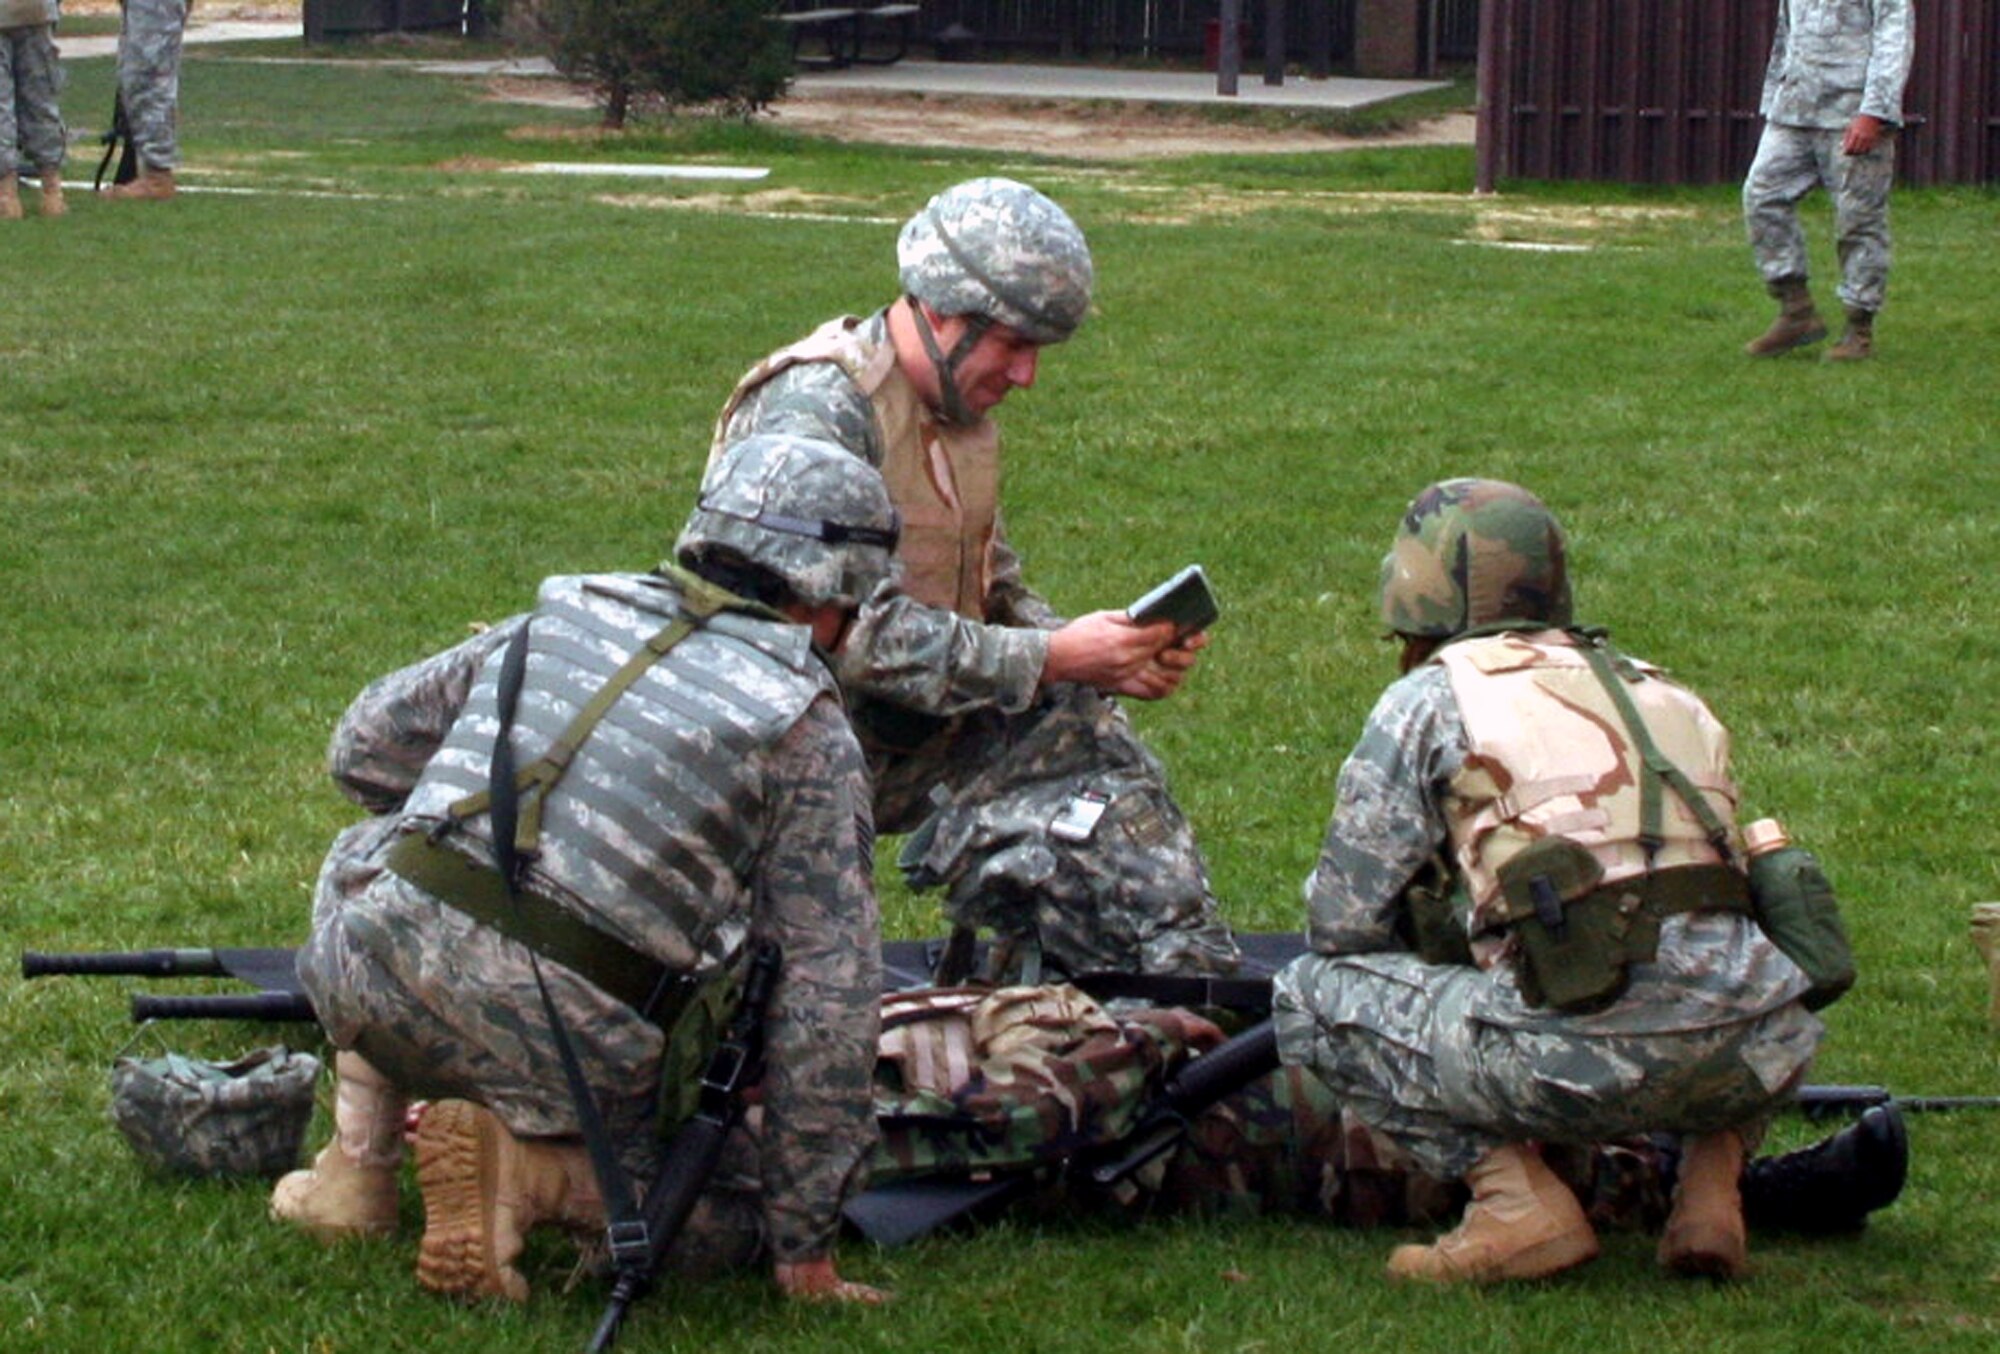 Students in the Combat Airman Skills Training Course participate in a training session of the Care Under Fire (combat first aid) class on Nov. 9, 2009, at the U.S. Air Force Expeditionary Center at Joint Base McGuire-Dix-Lakehurst, N.J.  The class, taught by the Expeditionary Center's 421st Combat Training Squadron, focuses on combat lifesaver skills.  The CAST course trains Airmen for upcoming deployments.  (U.S. Air Force Photo/Tech. Sgt. Scott T. Sturkol)